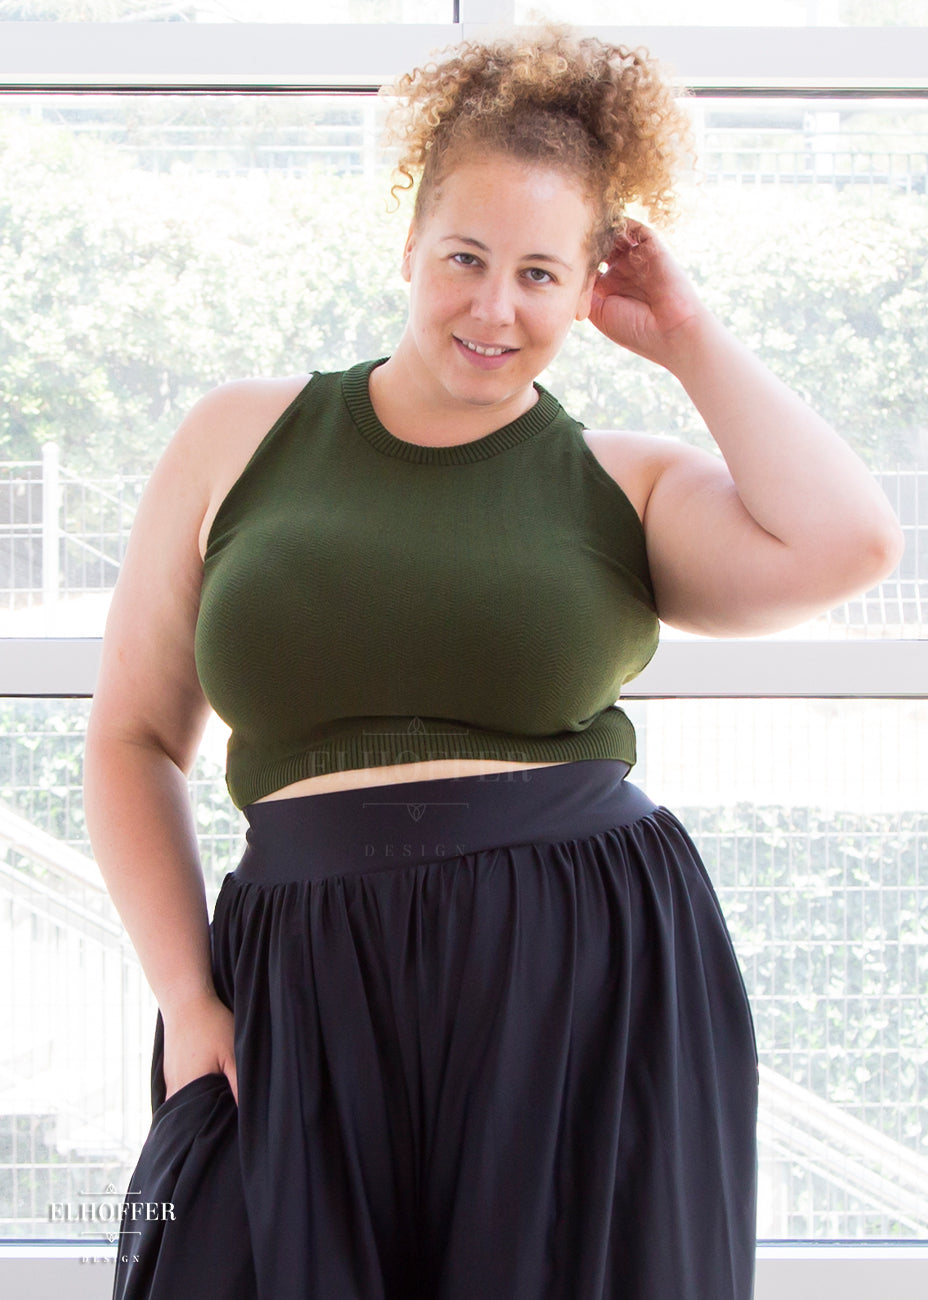 Anastasia (a medium fair skinned size extra large model with curly blonde hair) wears the olive green sleeveless high necked knit crop top. Its hem falls to her natural waist.